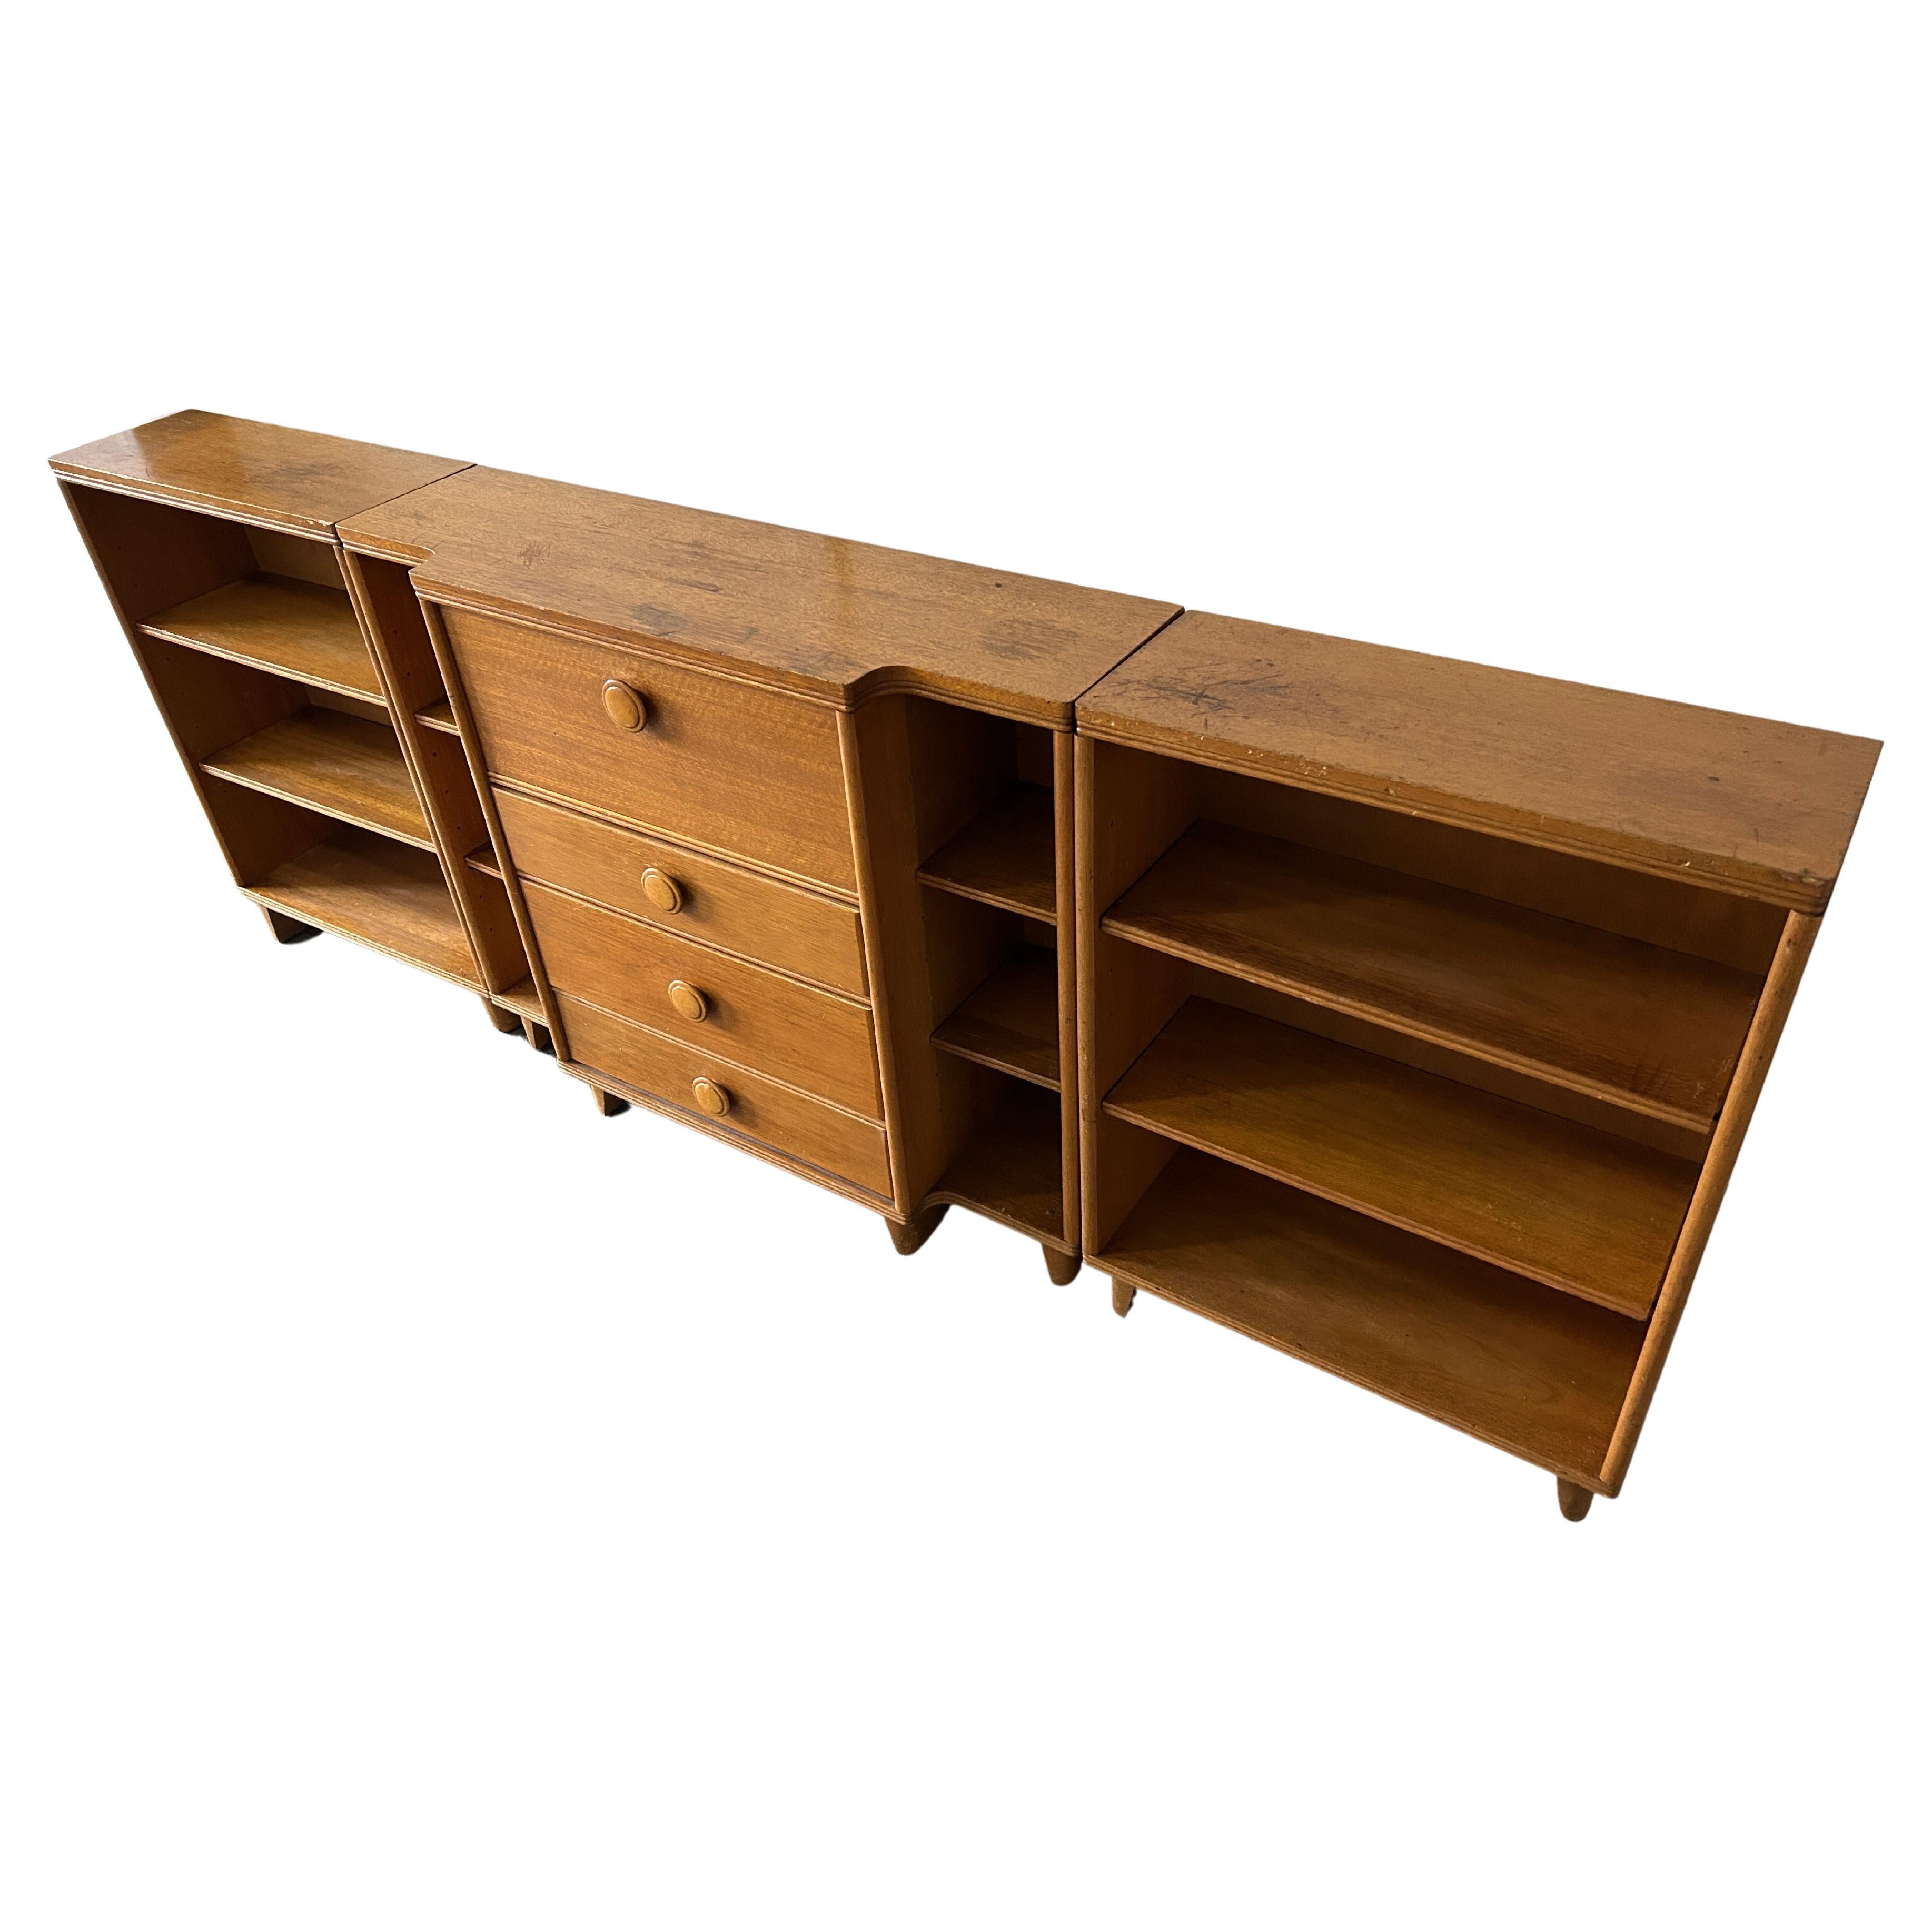 Mid-20th Century Mid-Century Modern Deco Drop Down Desk with 2 Bookcases For Sale